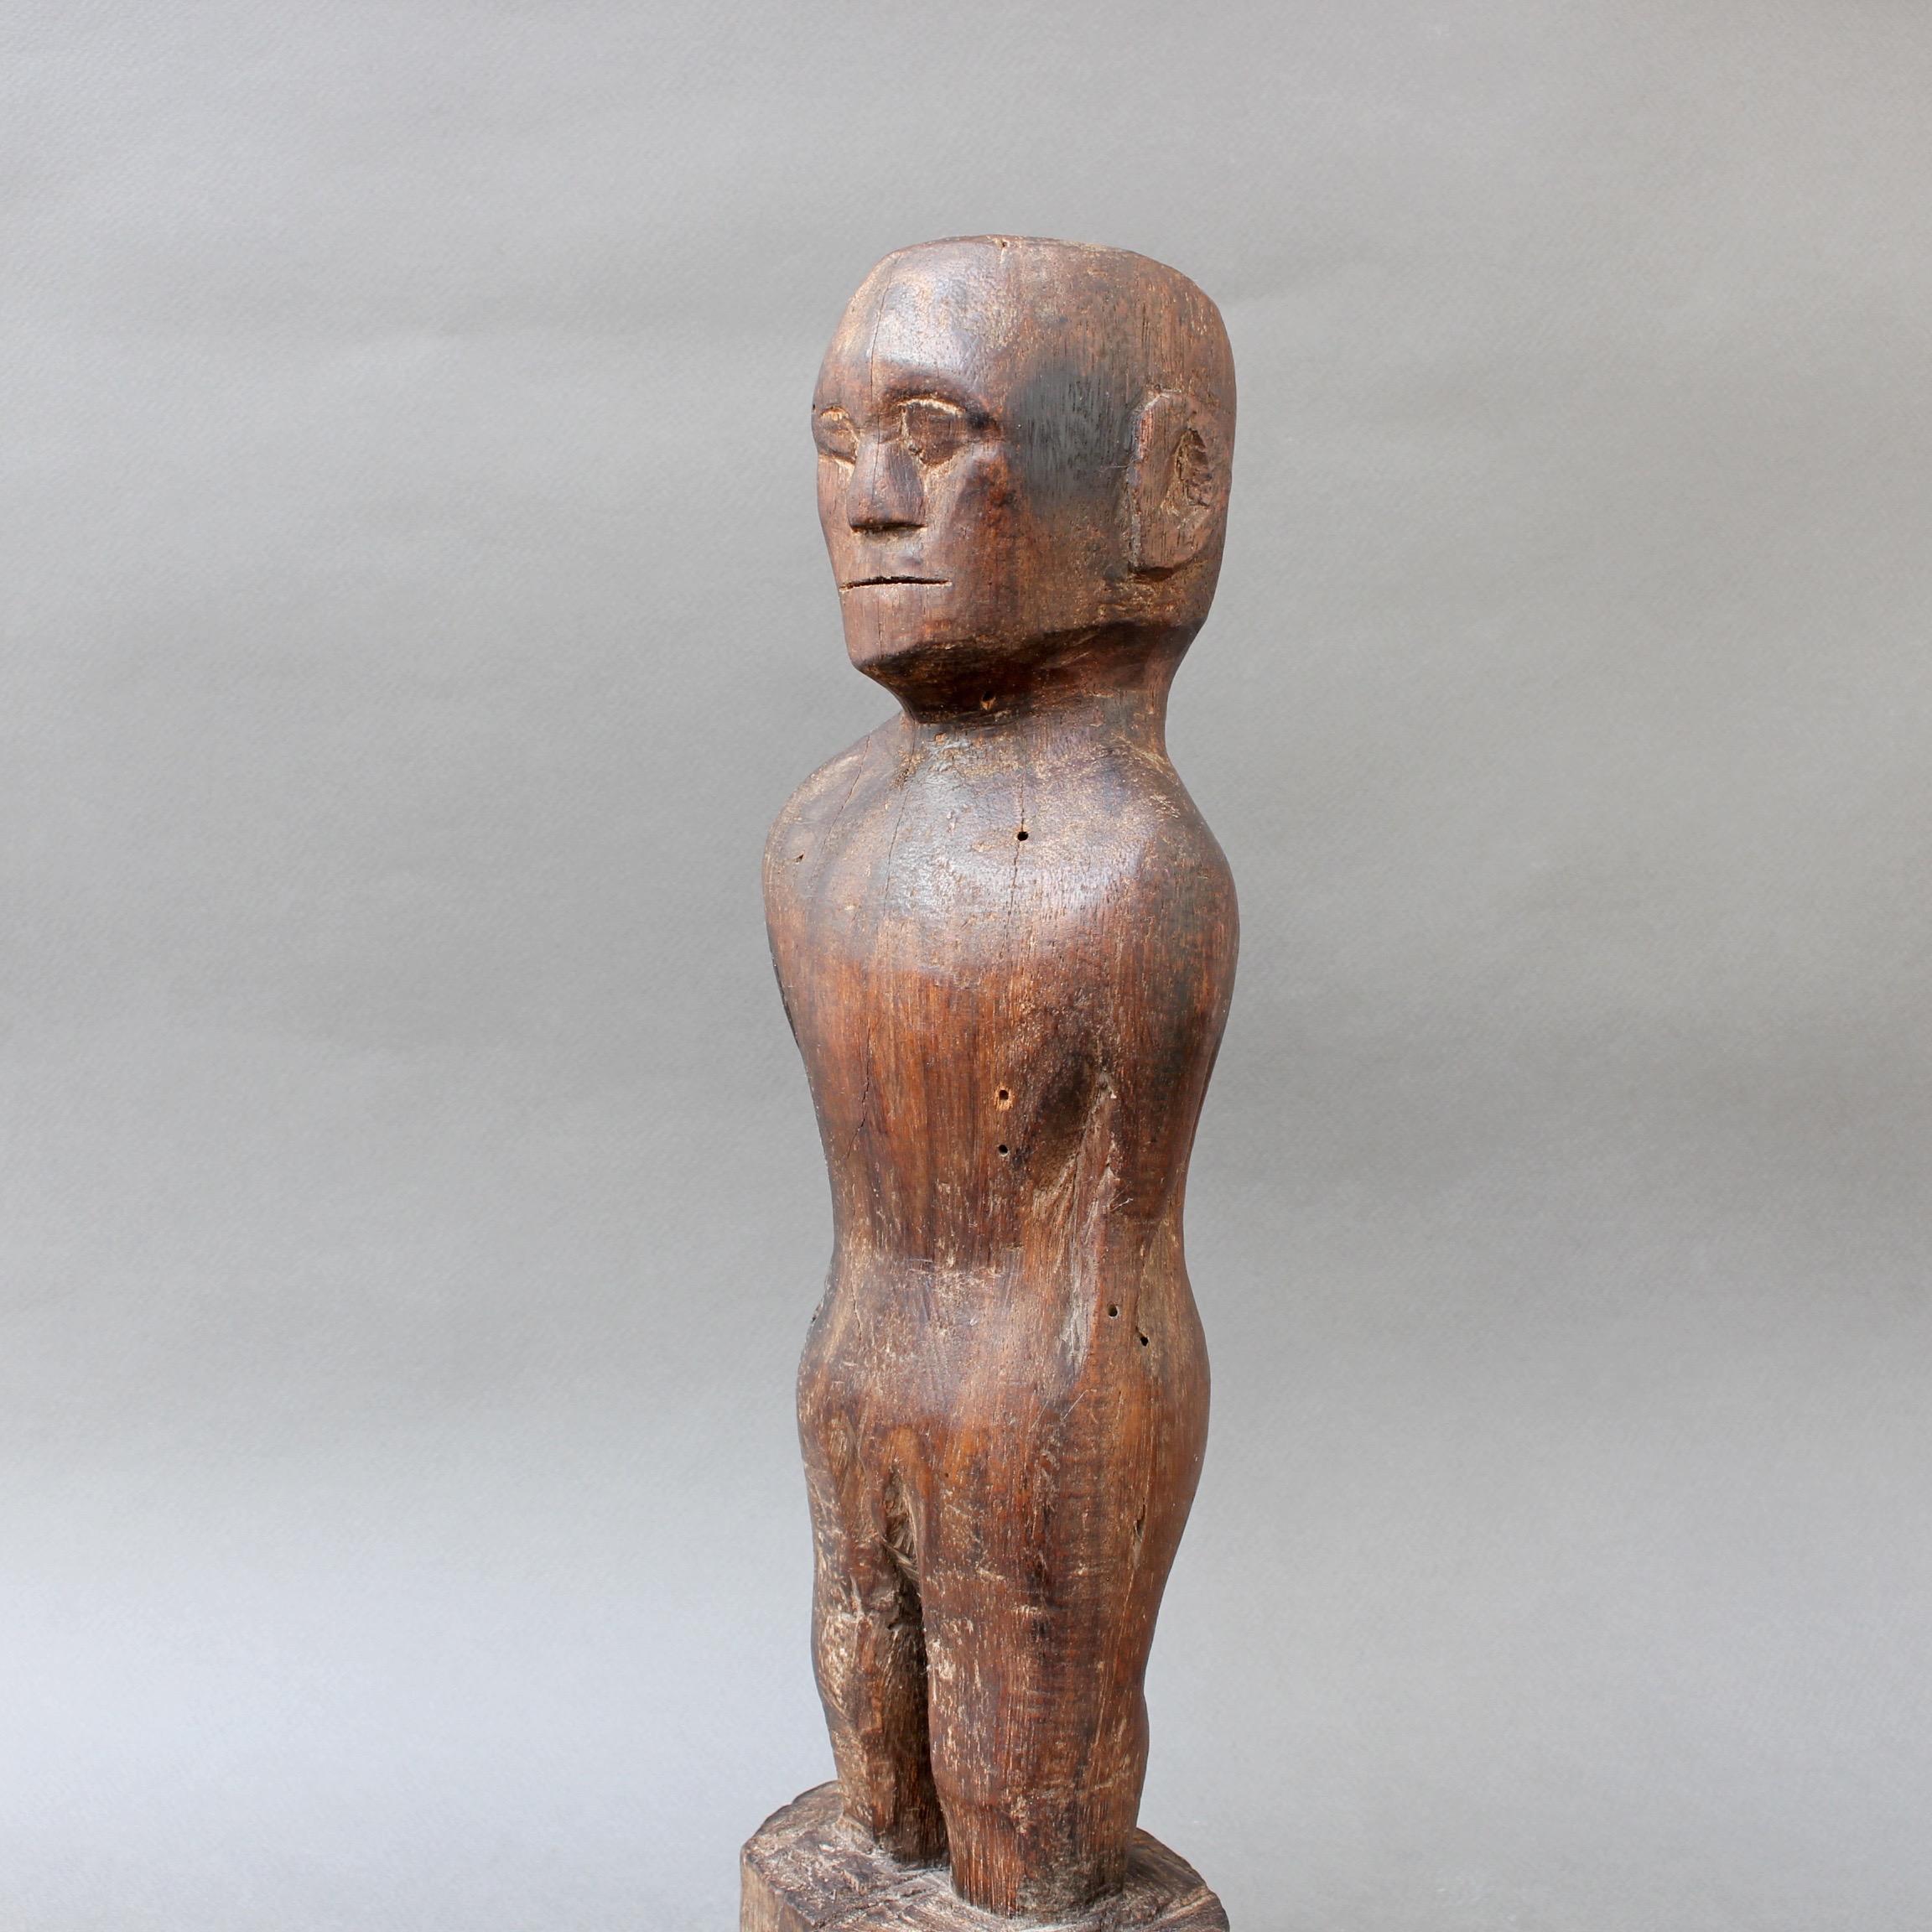 20th Century Wooden Carving or Sculpture of Standing Ancestral Figure from Timor, Indonesia